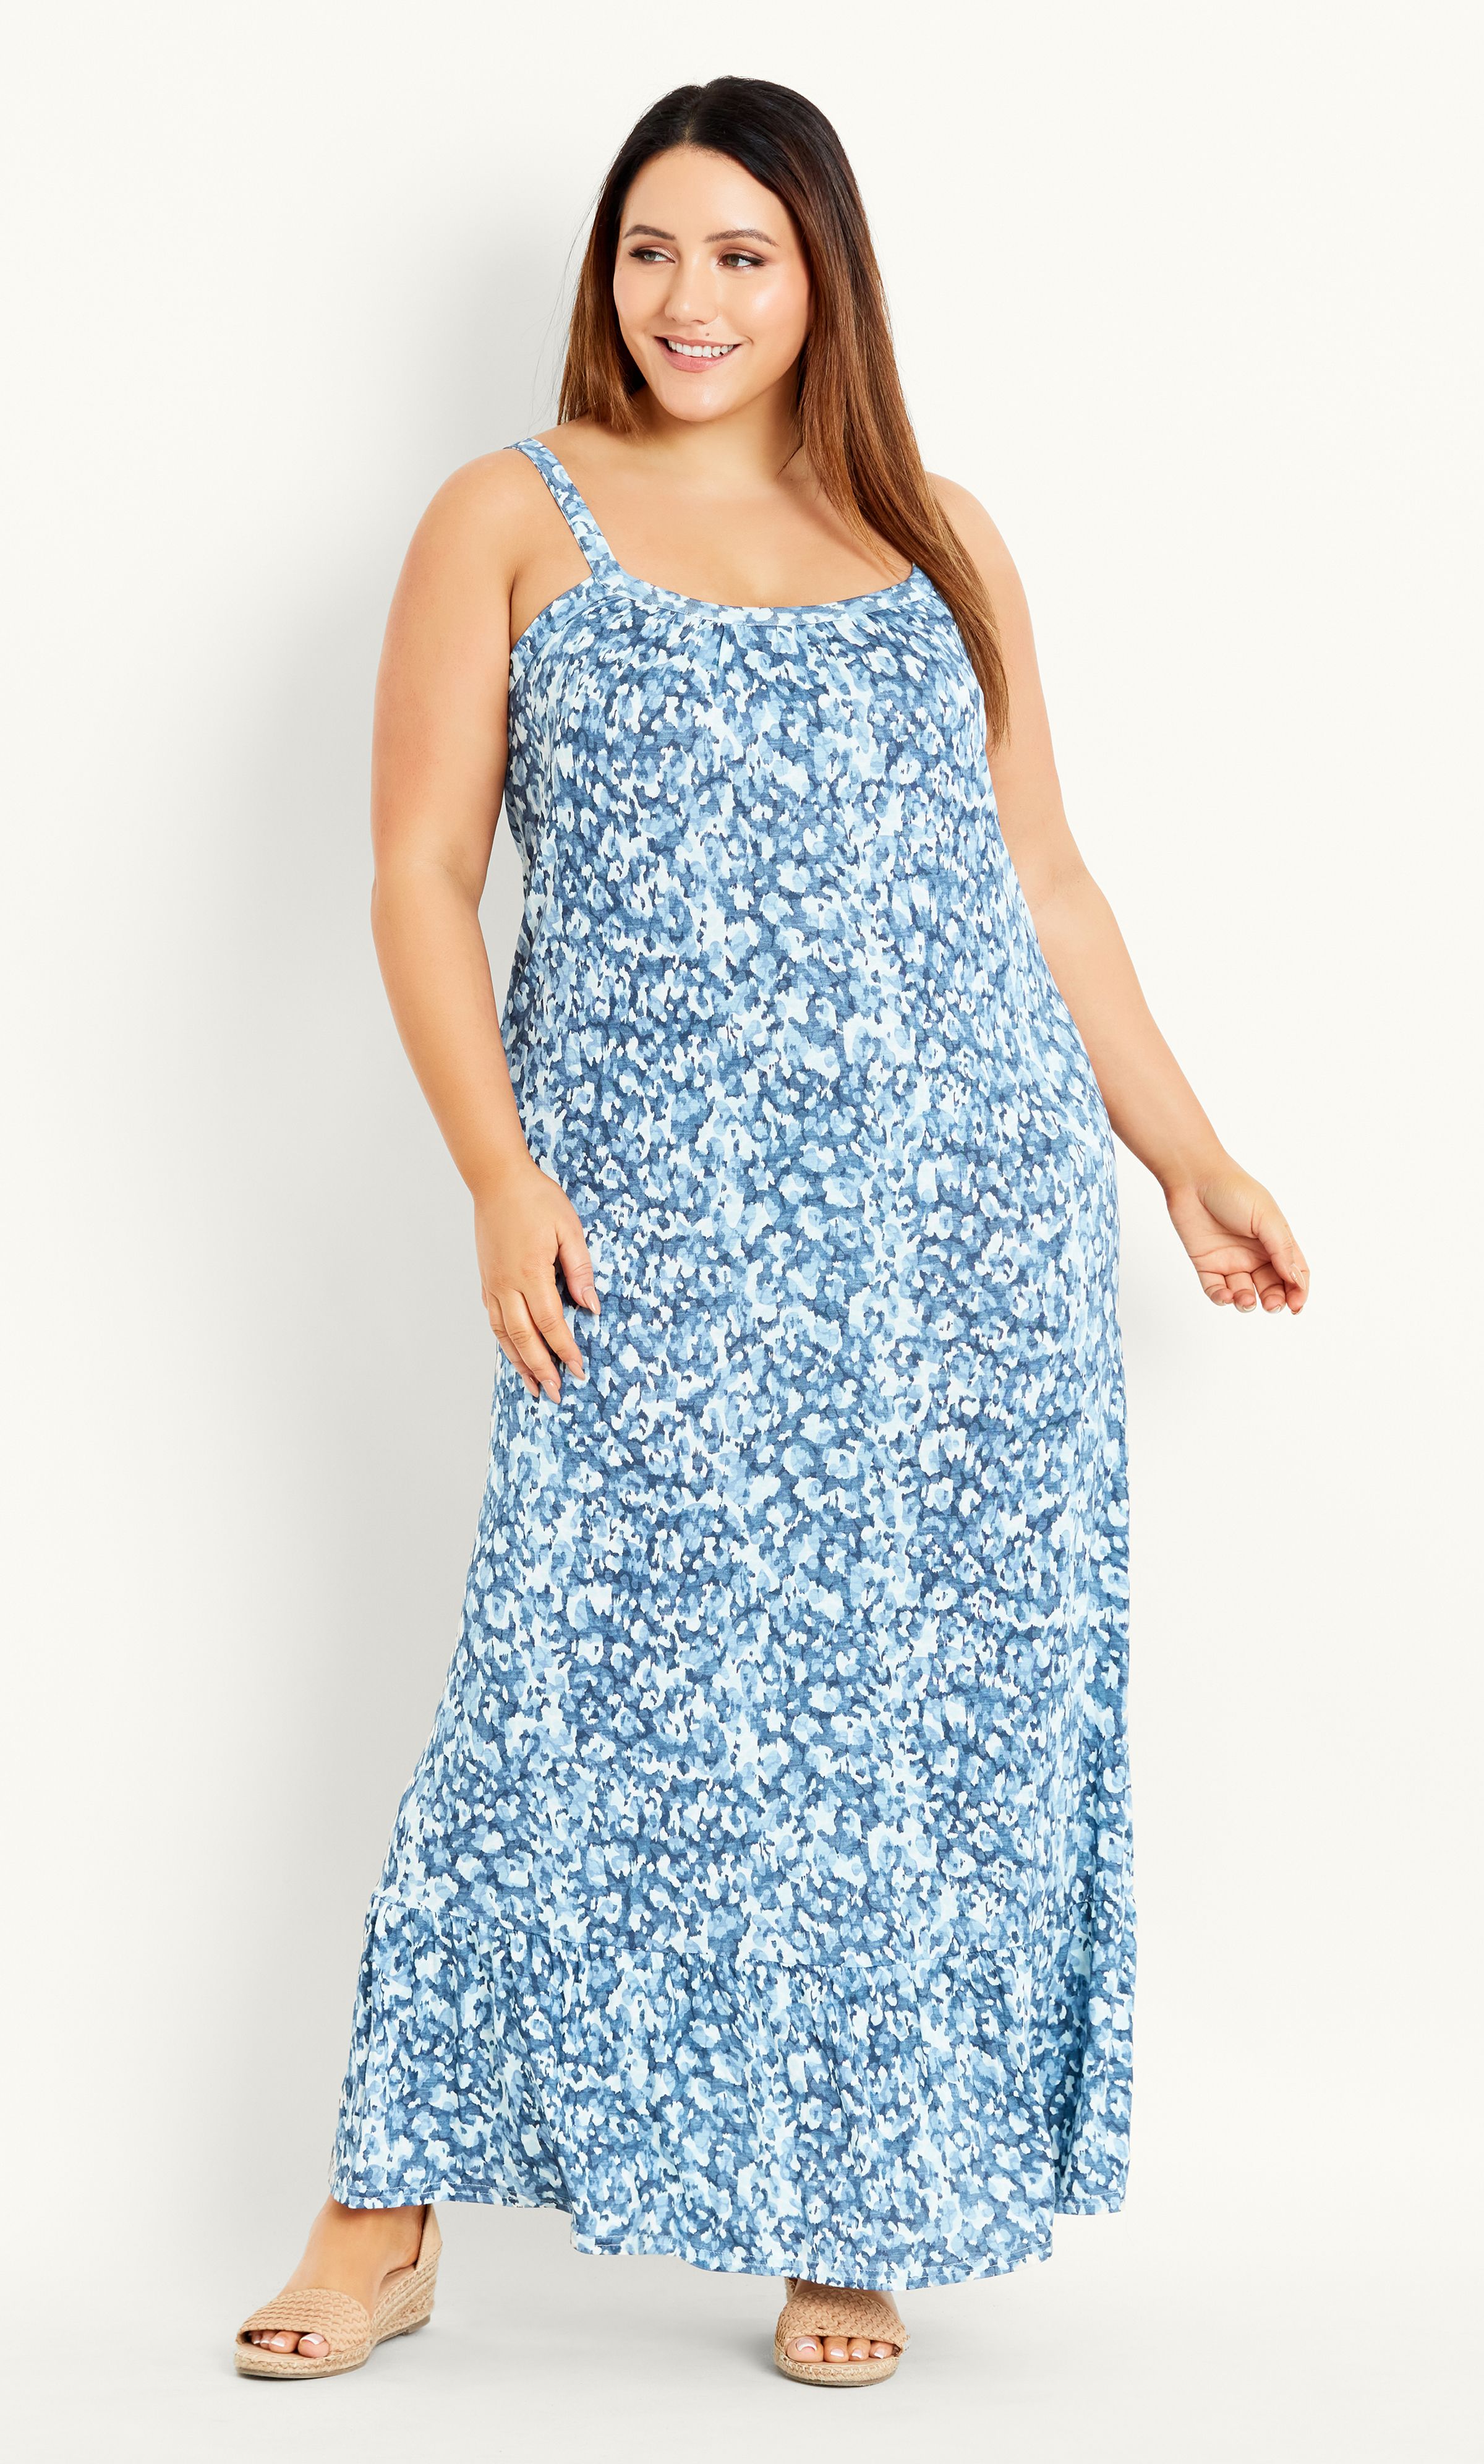 Add a pop of print to your summer rotation with the vibrant Smudge Print Maxi Dress. Featuring a scoop neckline, relaxed fit and all-over blue print, this maxi dress delivers on effortless & striking warm weather style. Key Features Include: - Scoop neckline - Thin shoulder straps - Frilled hemline - Relaxed fit - Stretch fabrication Style with tan sandals and a cross-body bag for an easy everyday look.